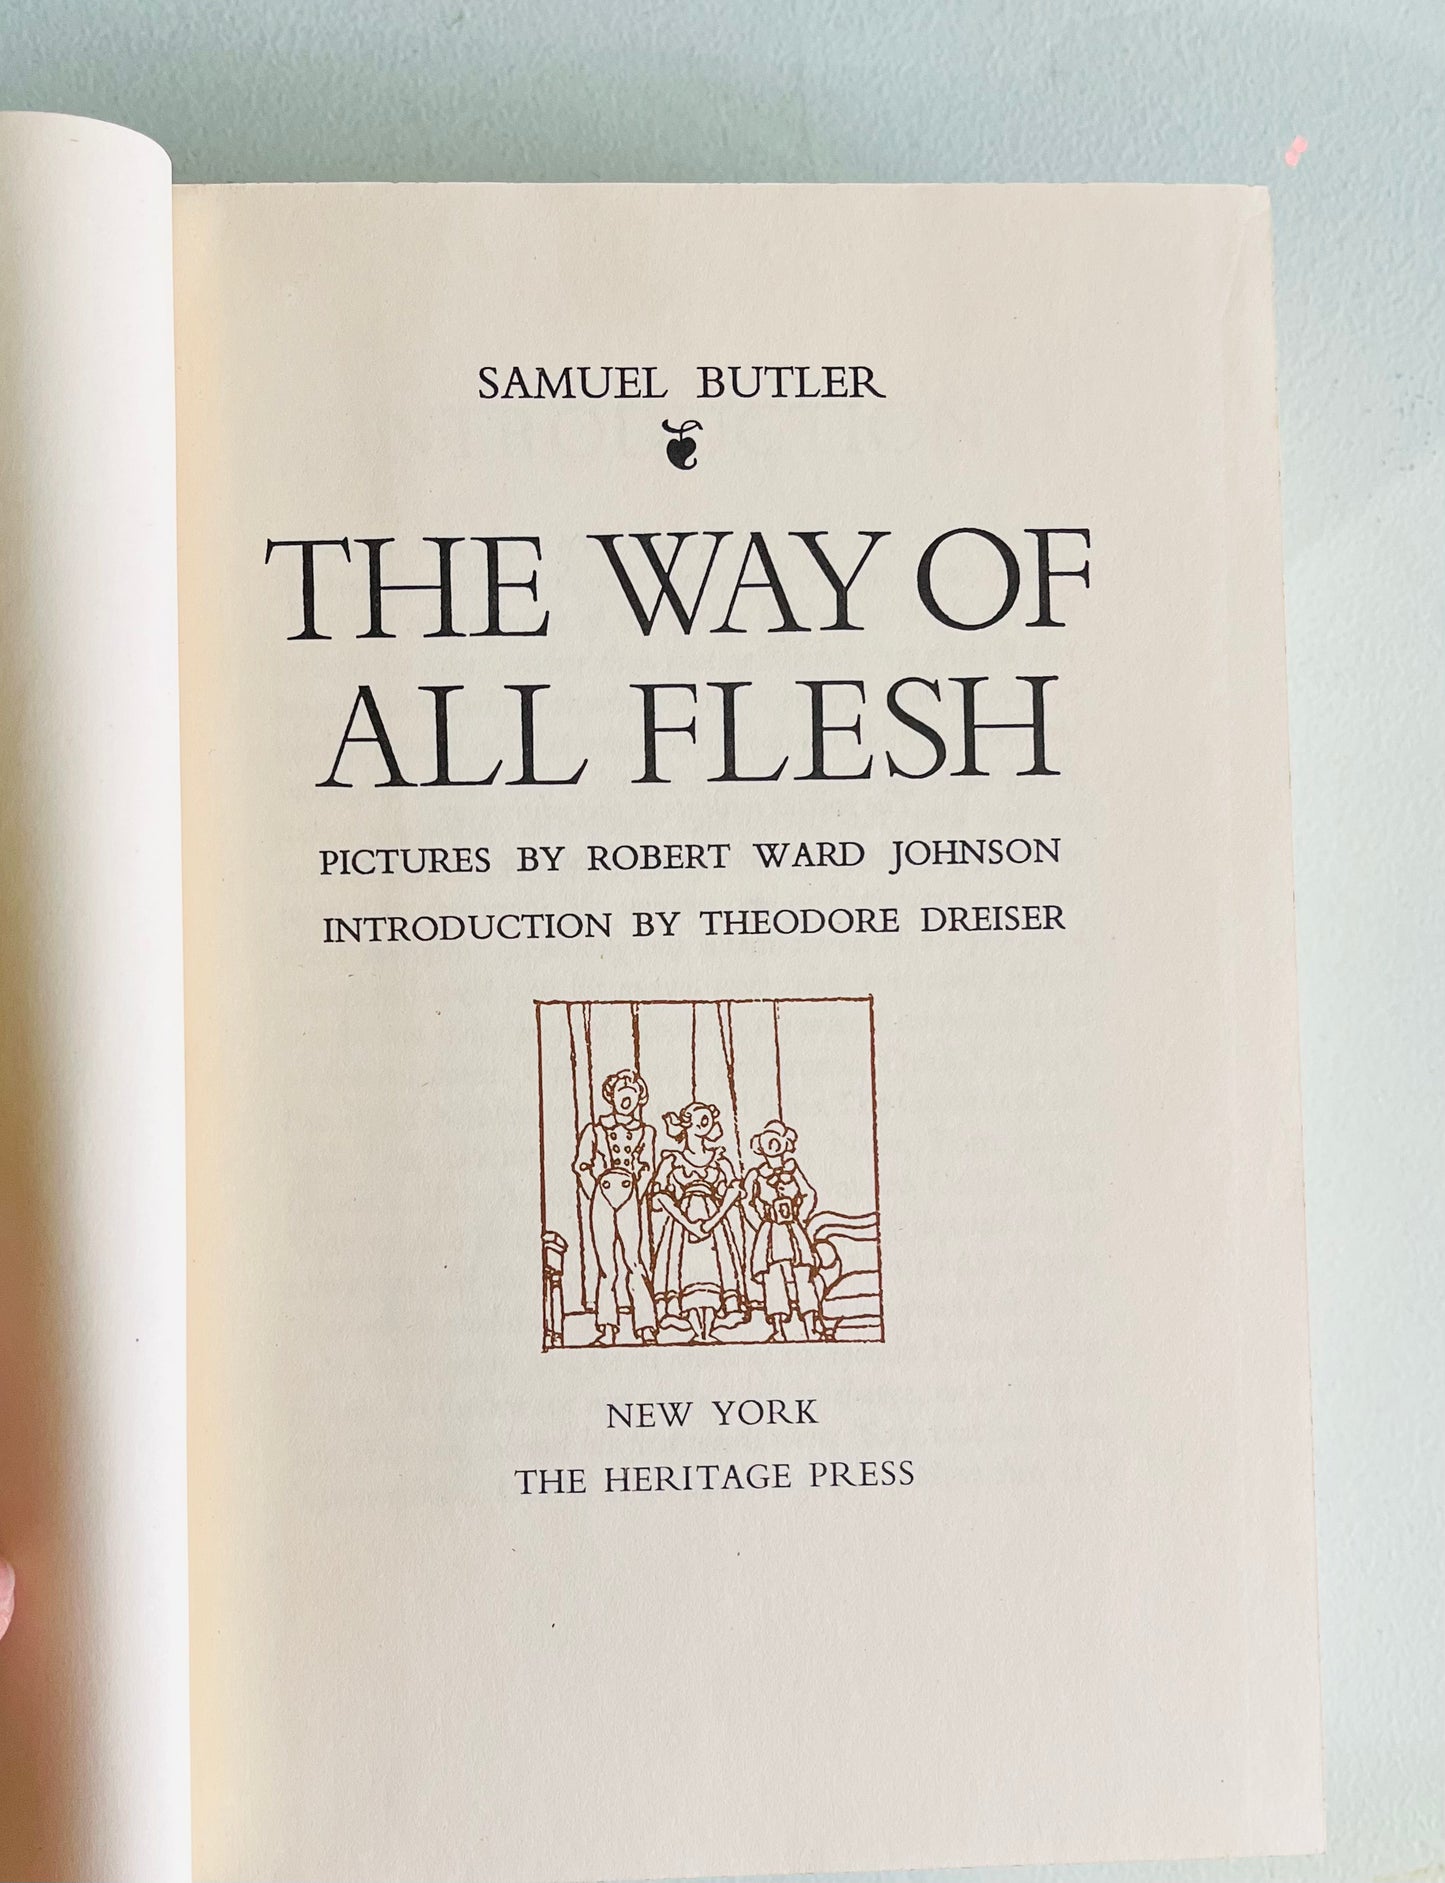 The Way of the Flesh